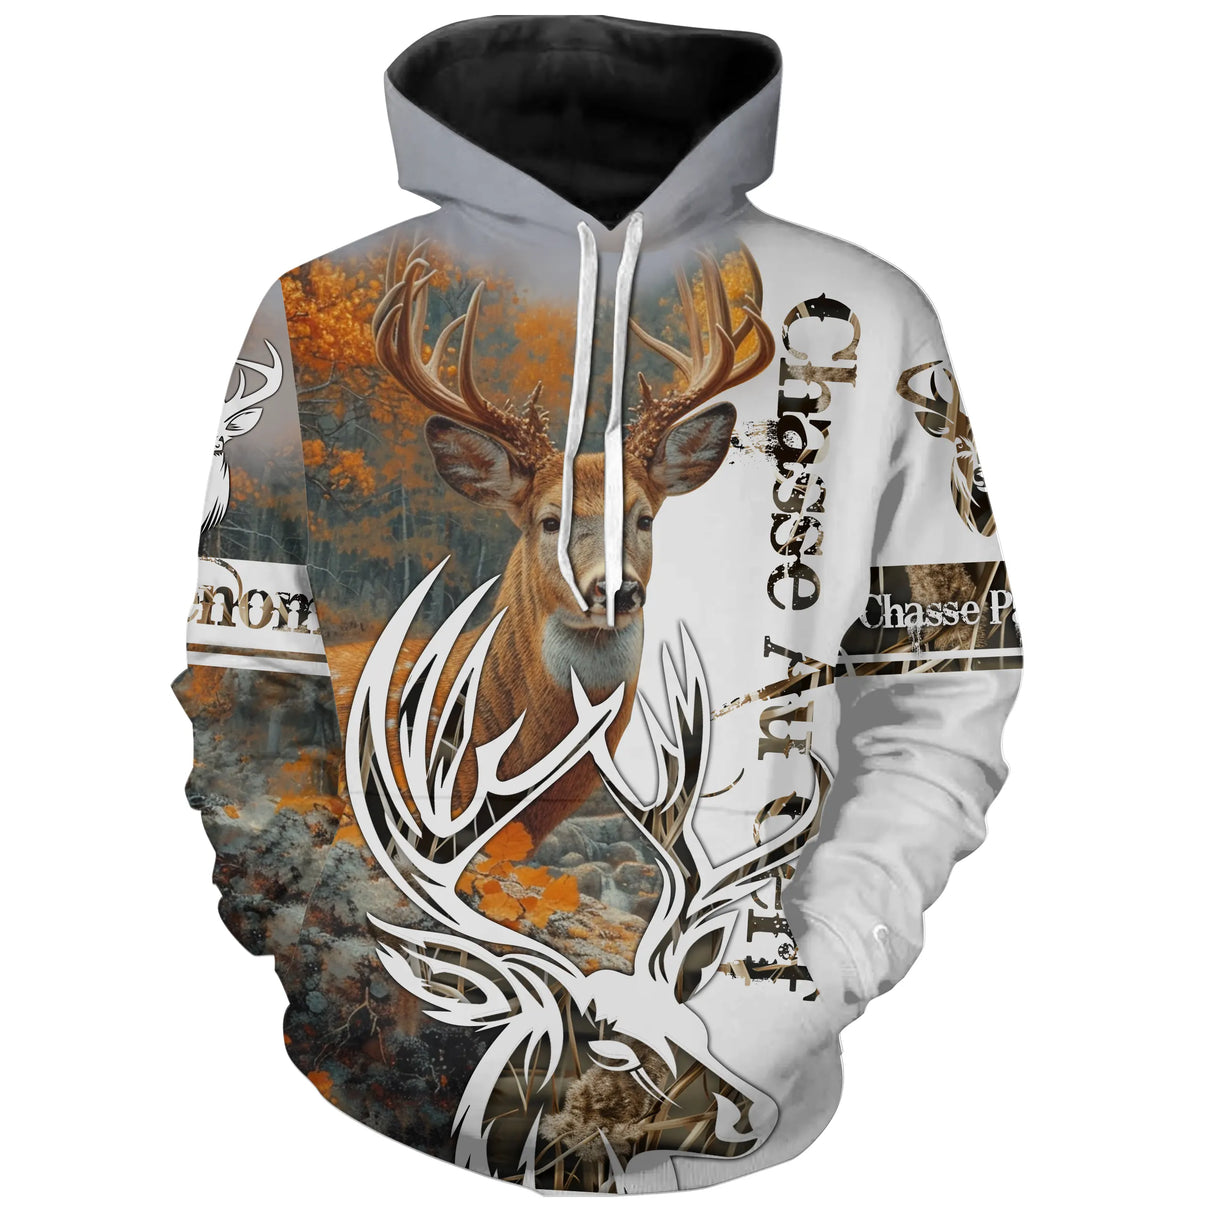 T-shirt, Sweat Chasse Au Cerf, Cadeau Personnaliser Chasseur, Camouflage Chasse Passion - CT09112219 Sweat à Capuche All Over Unisexe